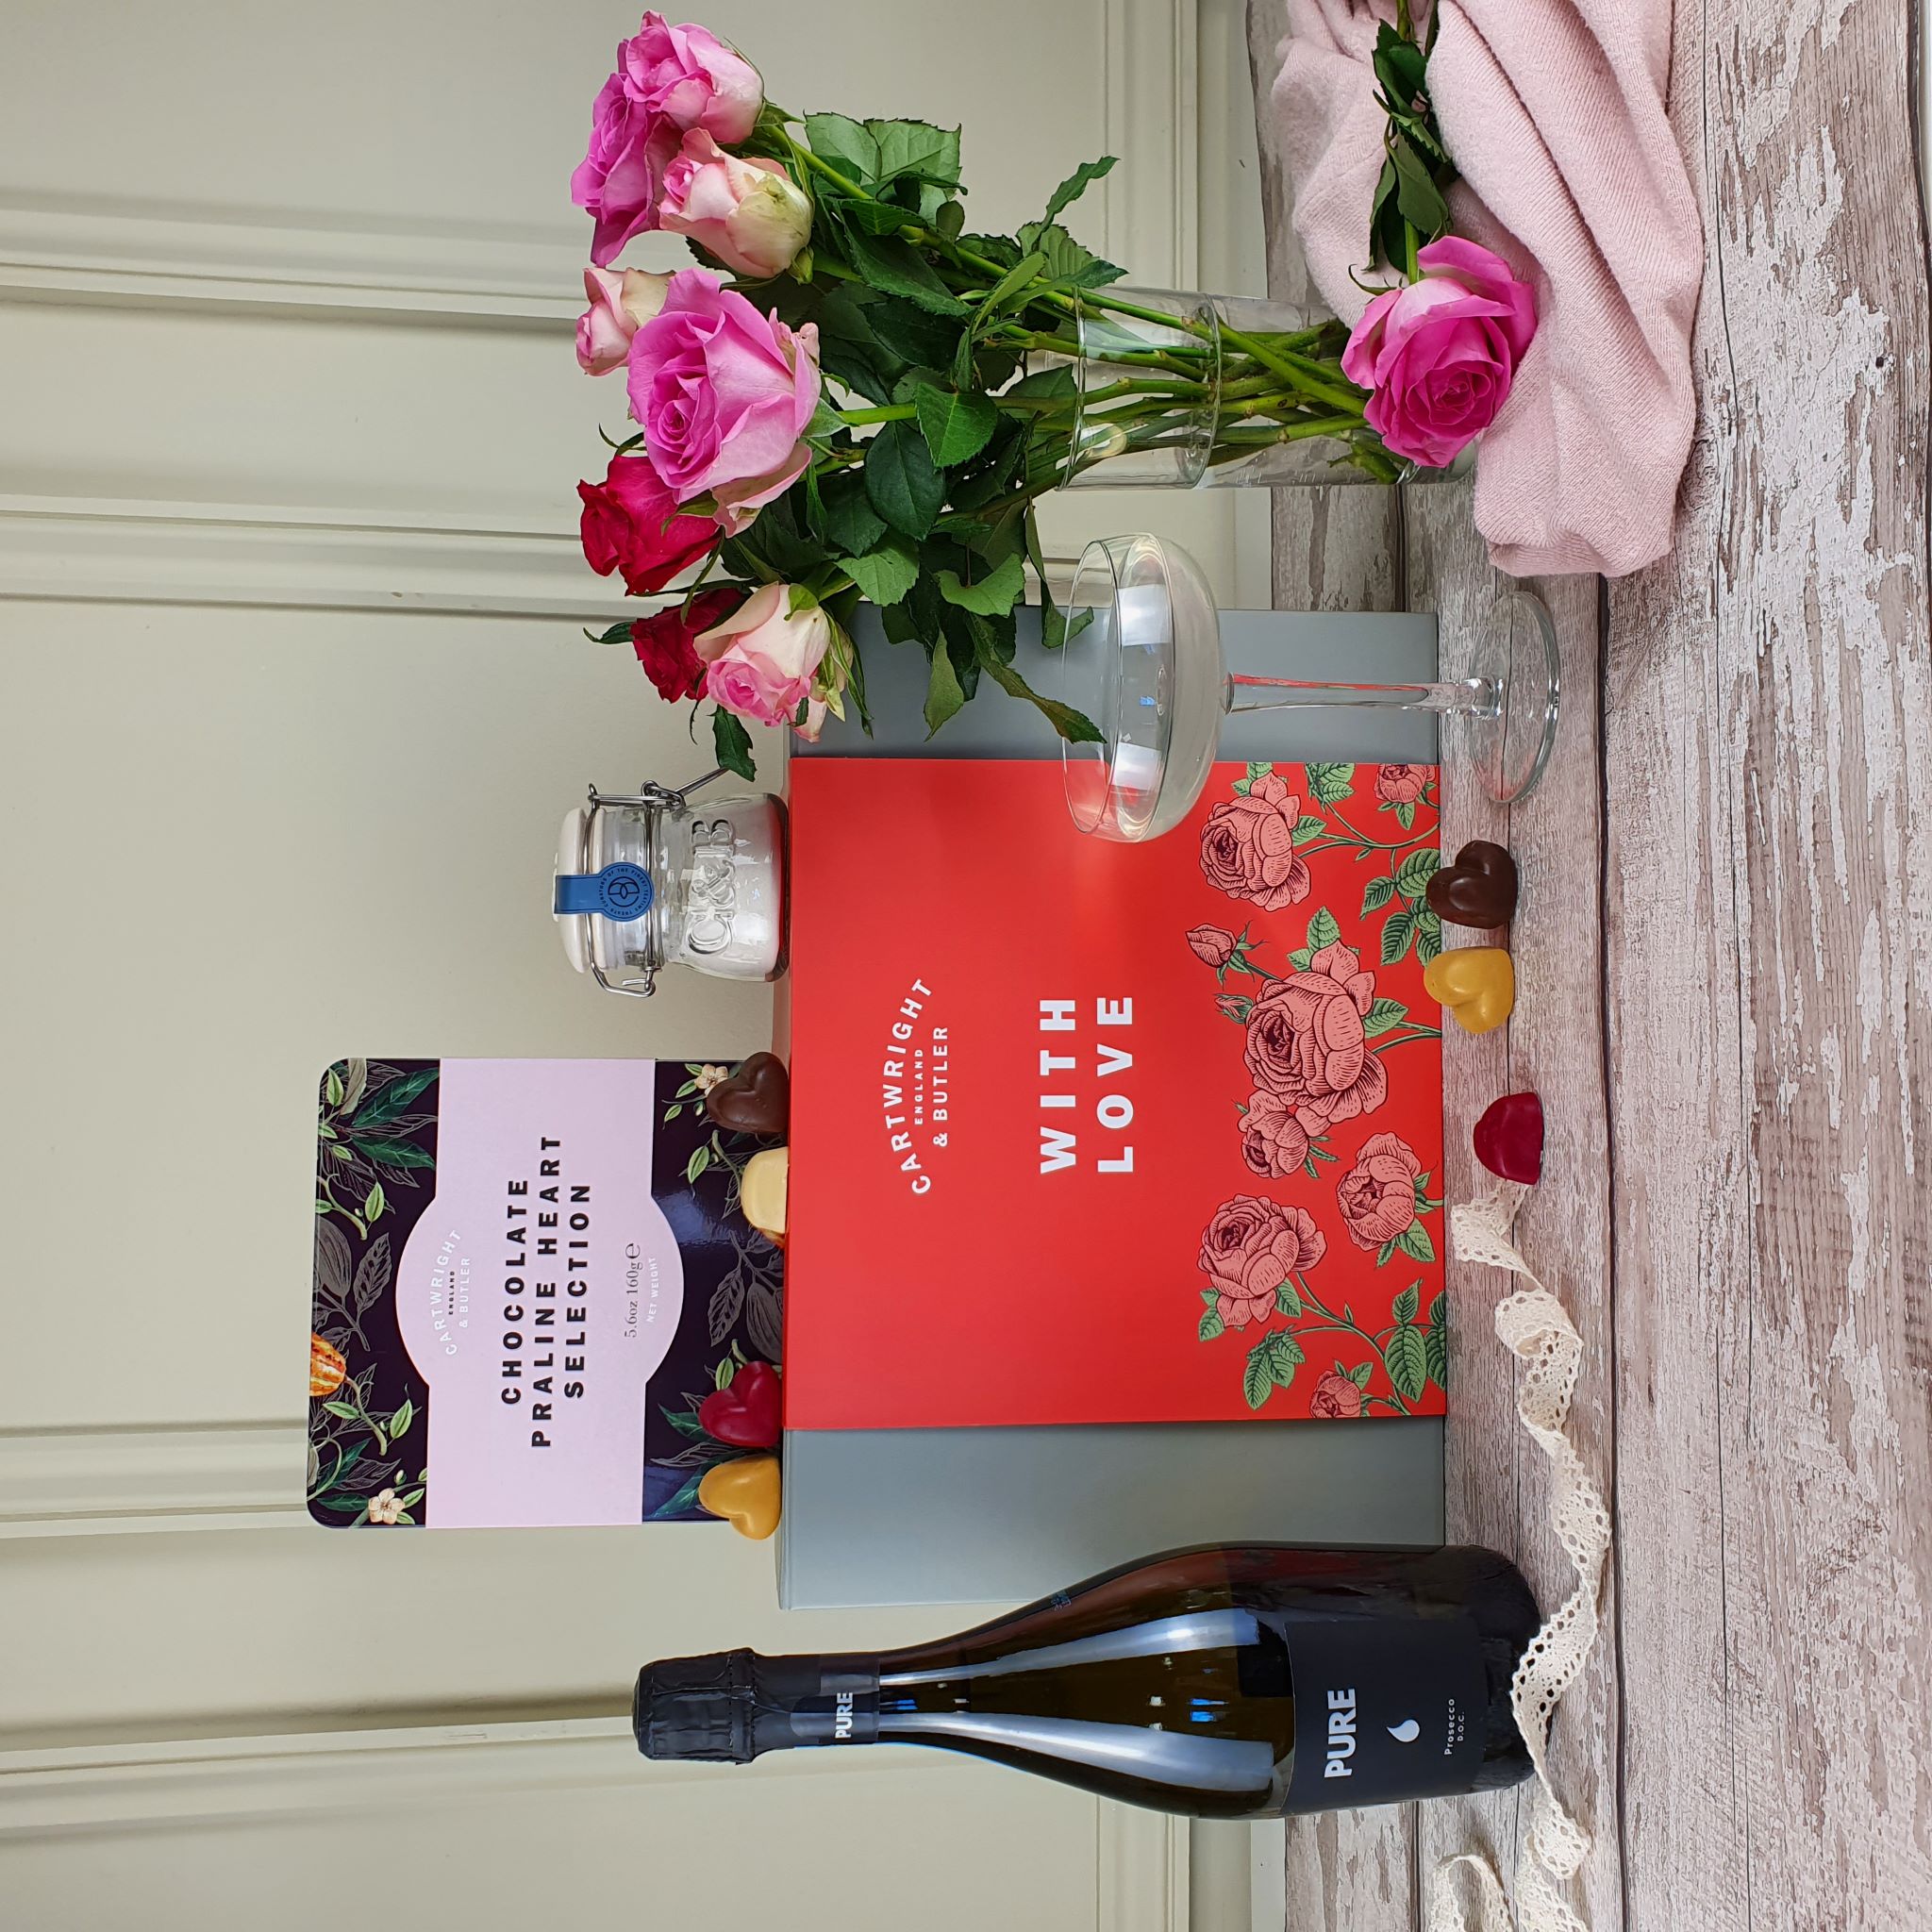 A Valentine's Day hamper for her featuring prosecco, flowers and chocolates